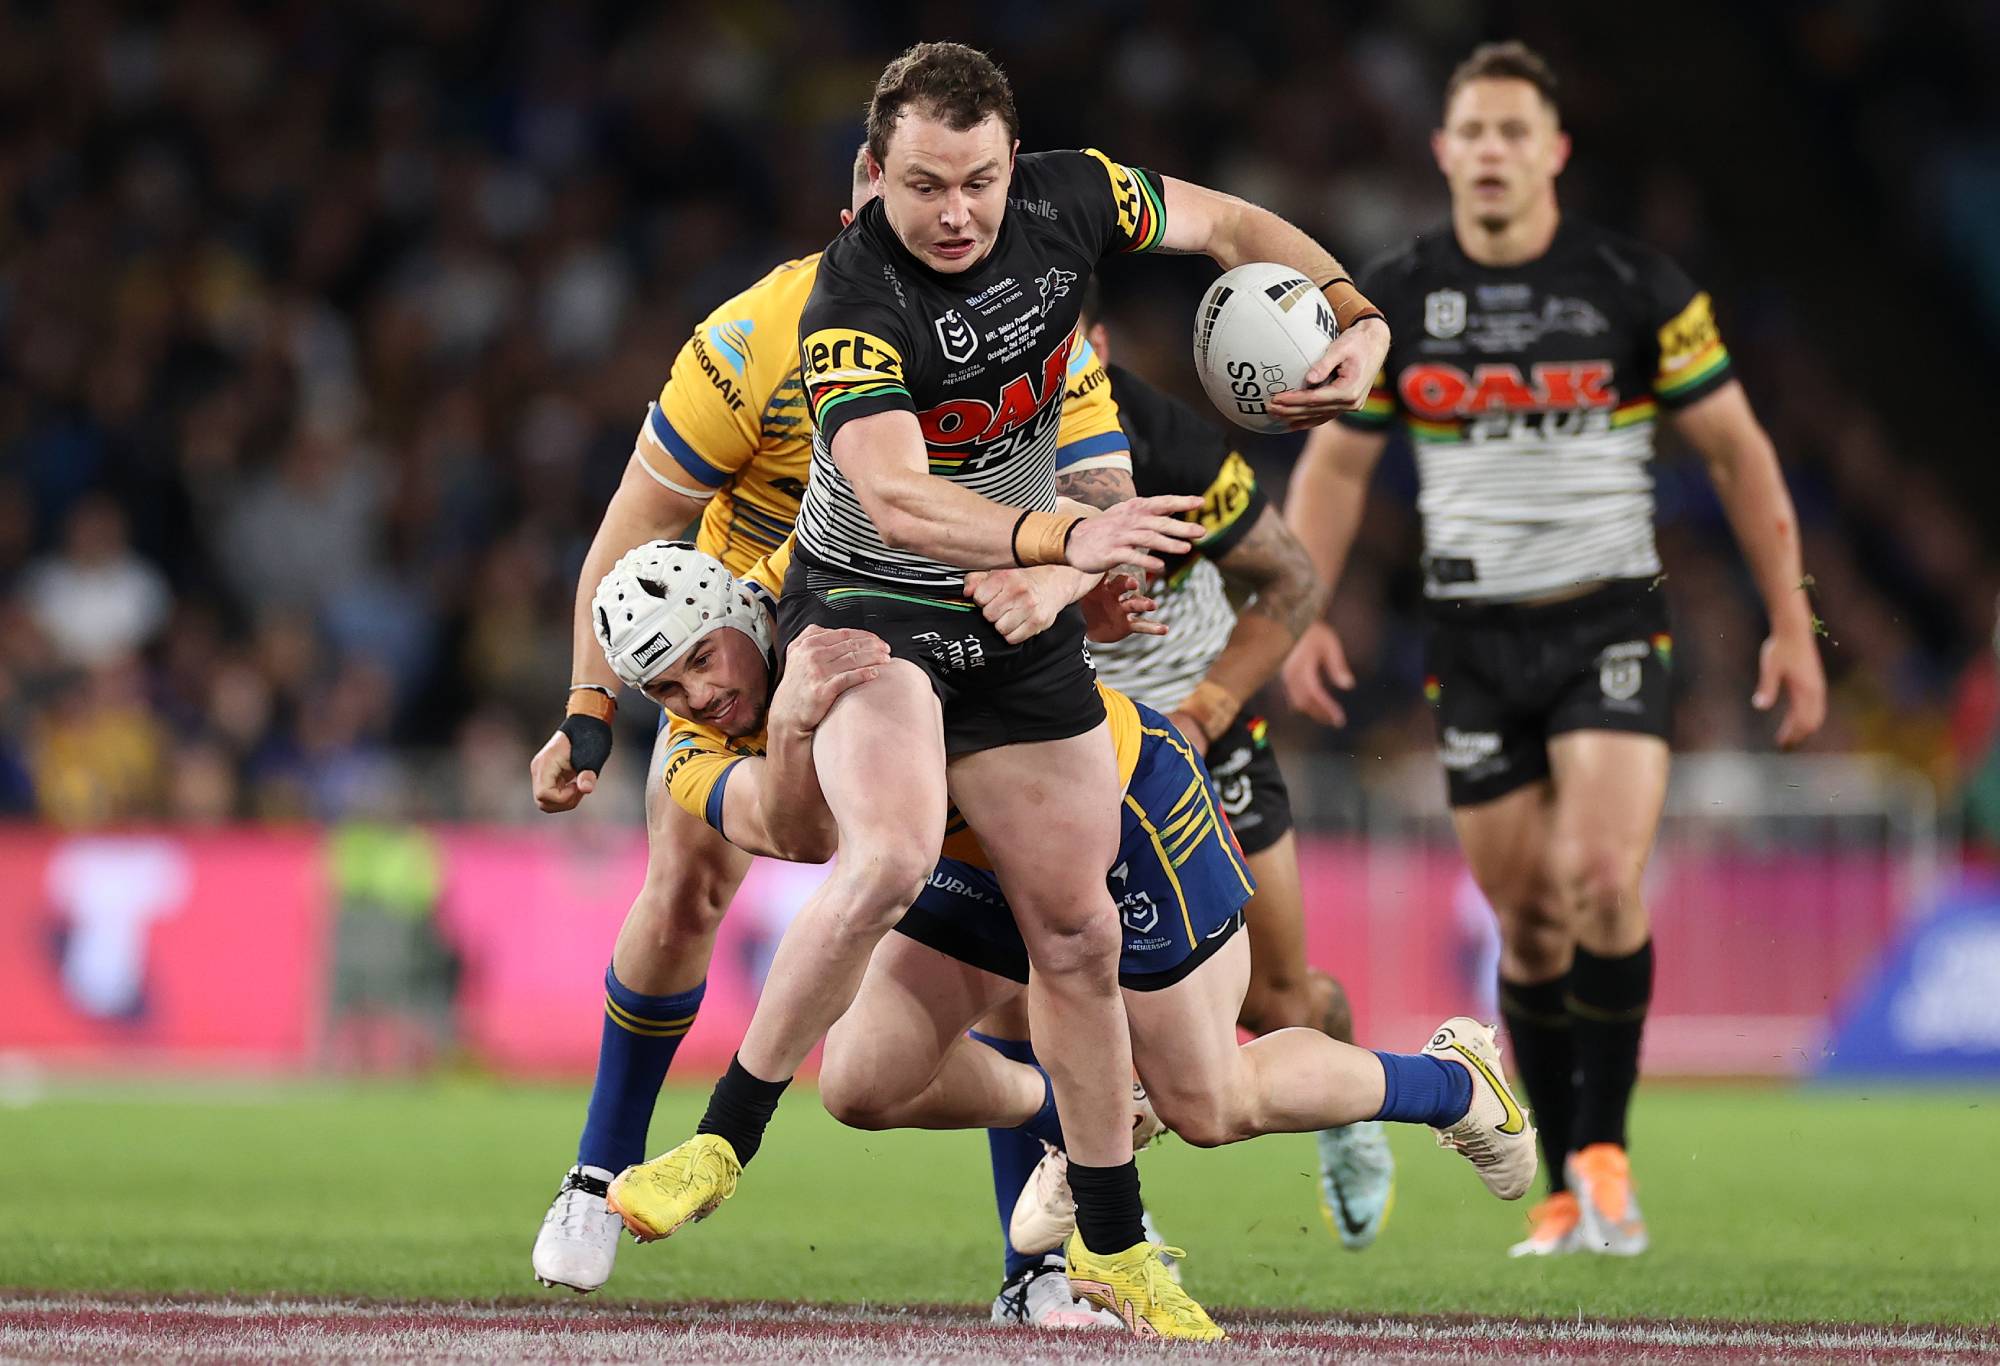 SYDNEY, AUSTRALIA - OCTOBER 02: Dylan Edwards of the Panthers makes a break during the 2022 NRL Grand Final match between the Penrith Panthers and the Parramatta Eels at Accor Stadium on October 02, 2022, in Sydney, Australia. (Photo by Cameron Spencer/Getty Images)